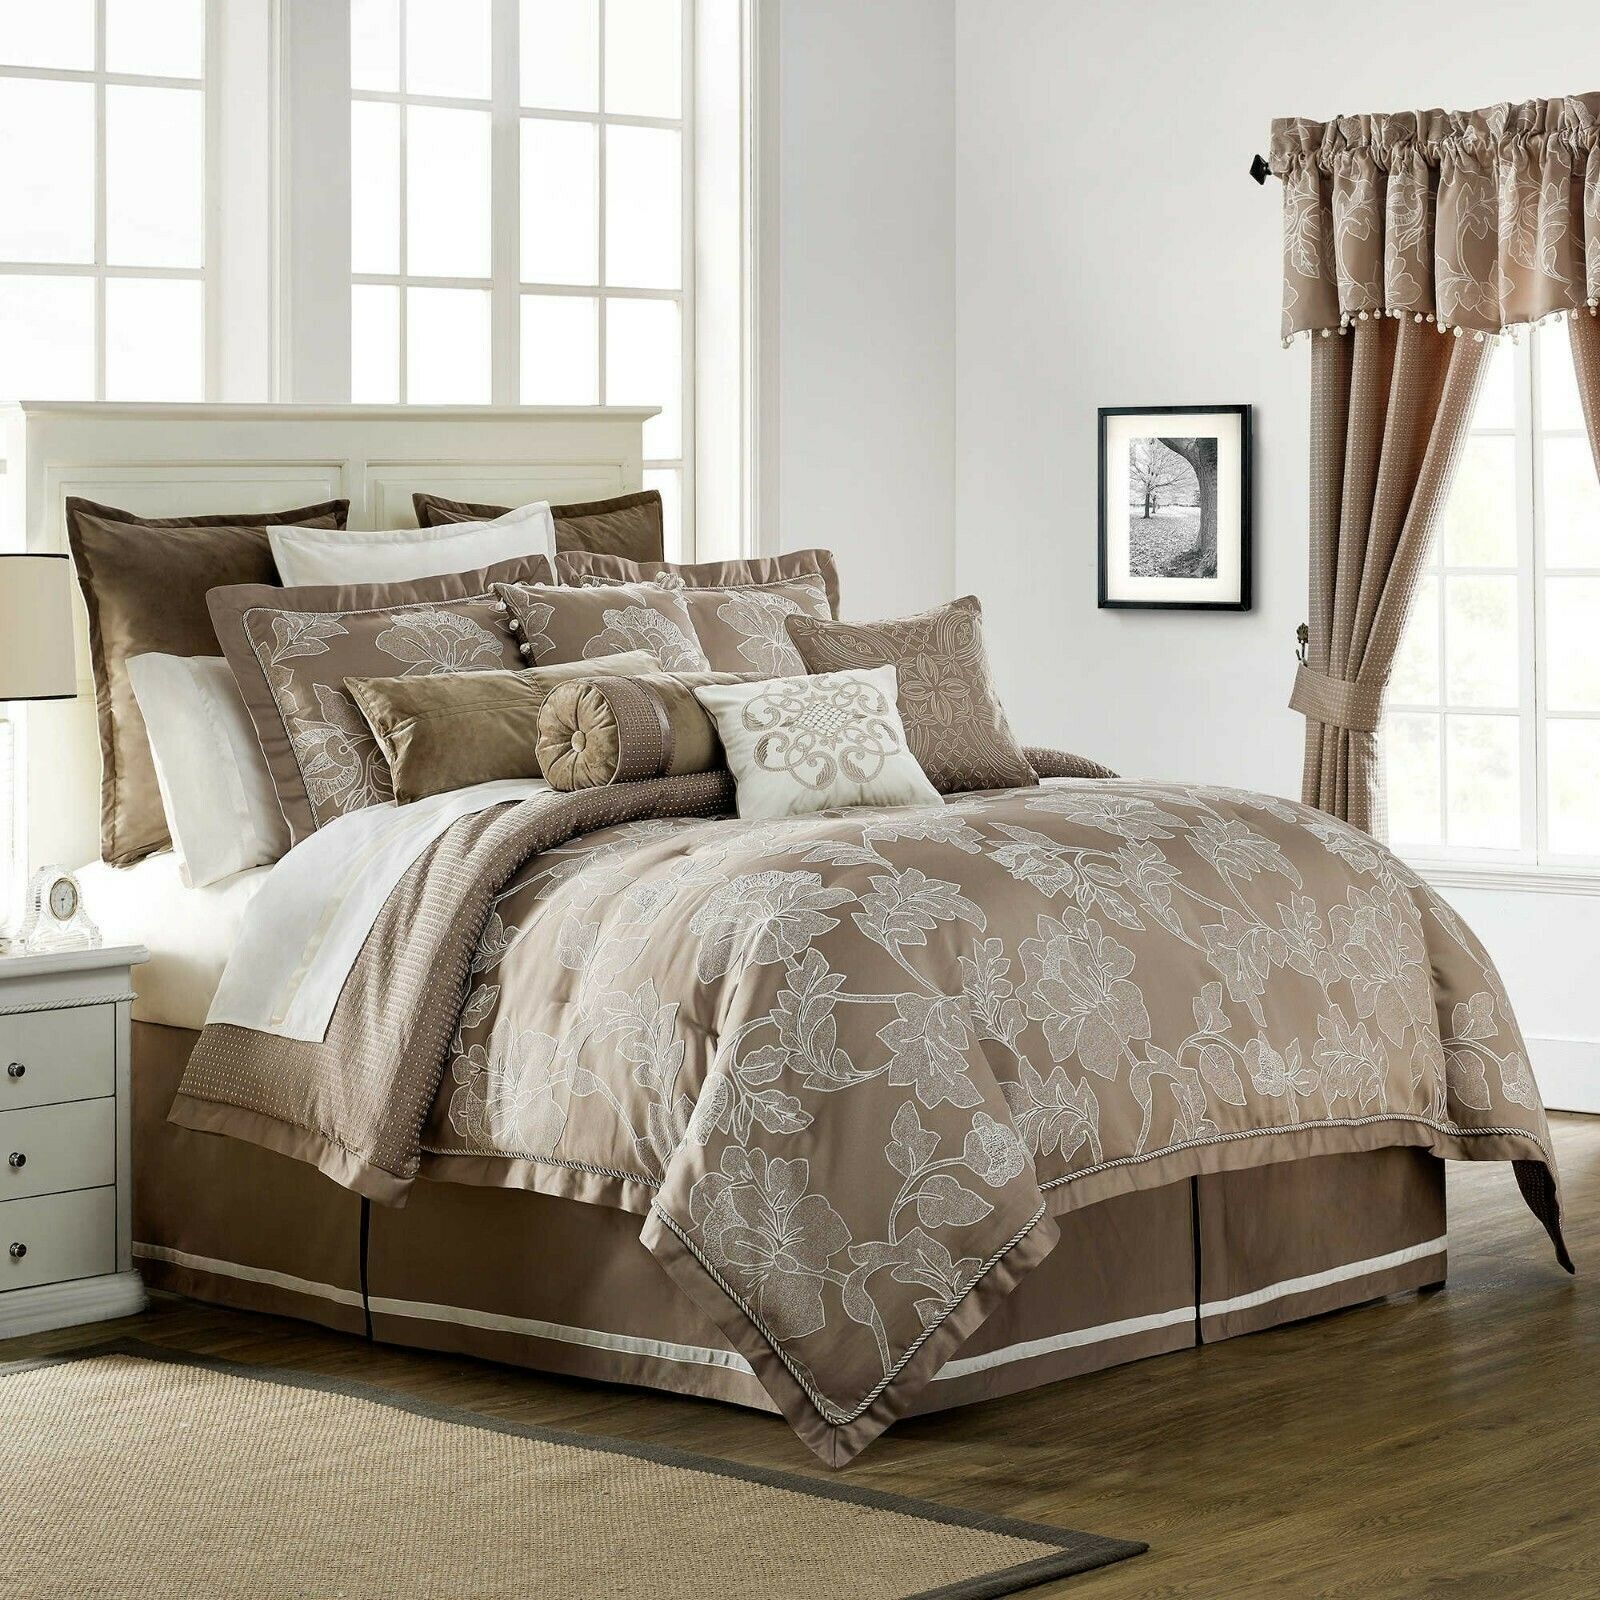 Waterford Comforter Set 2 Customer Reviews And 6 Listings